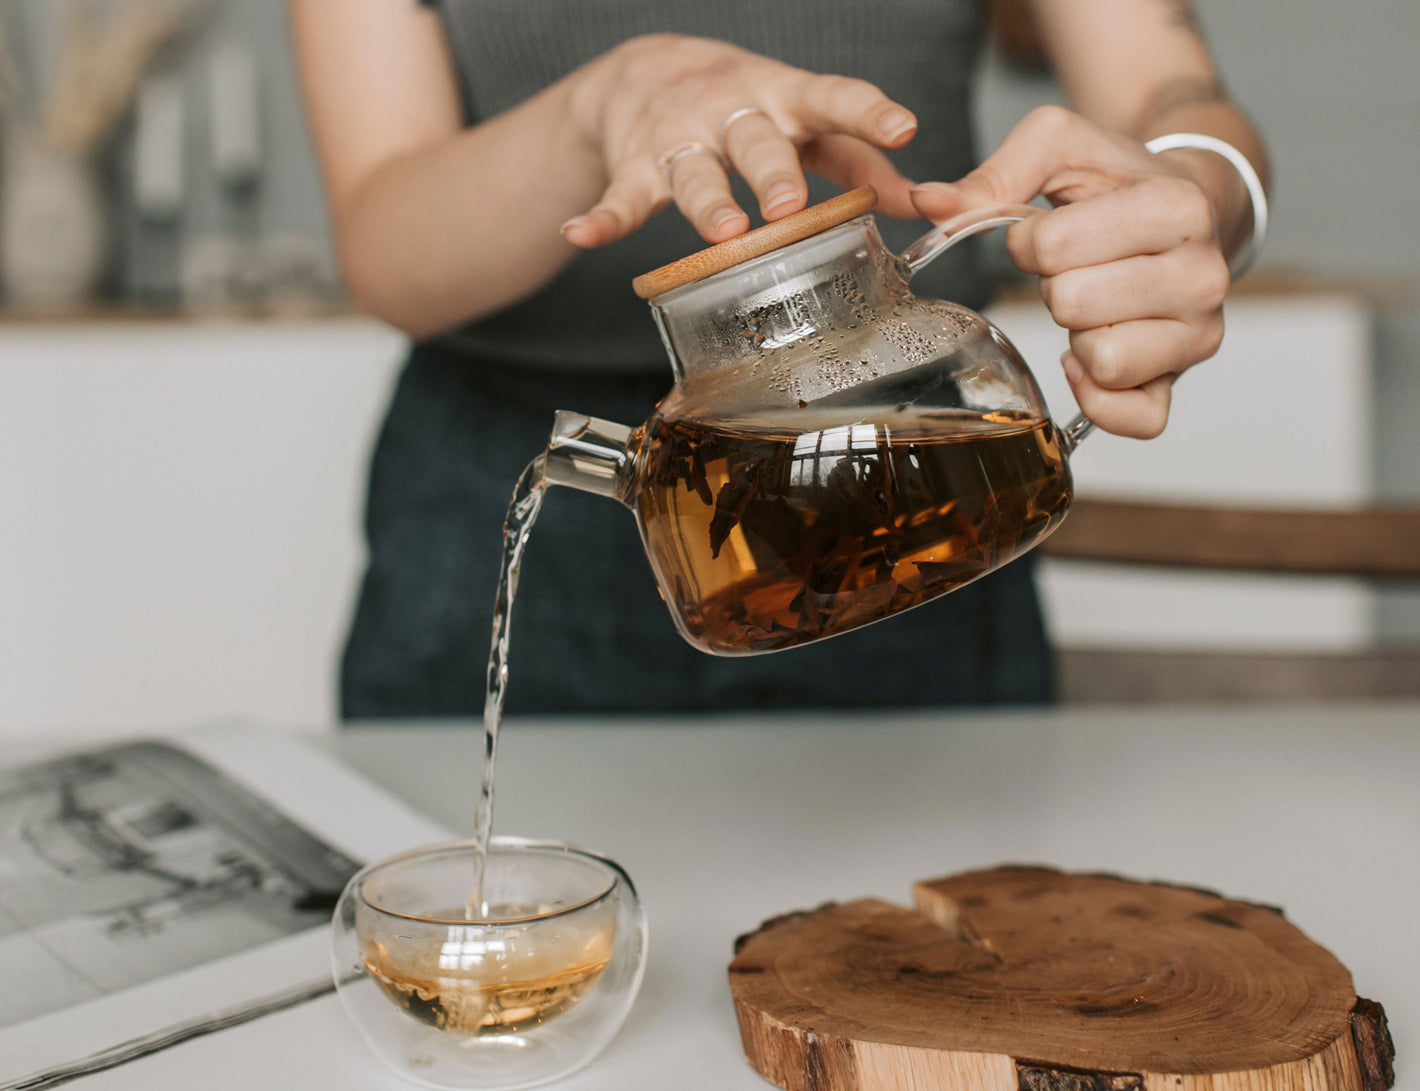 blending-teas-and-infusions